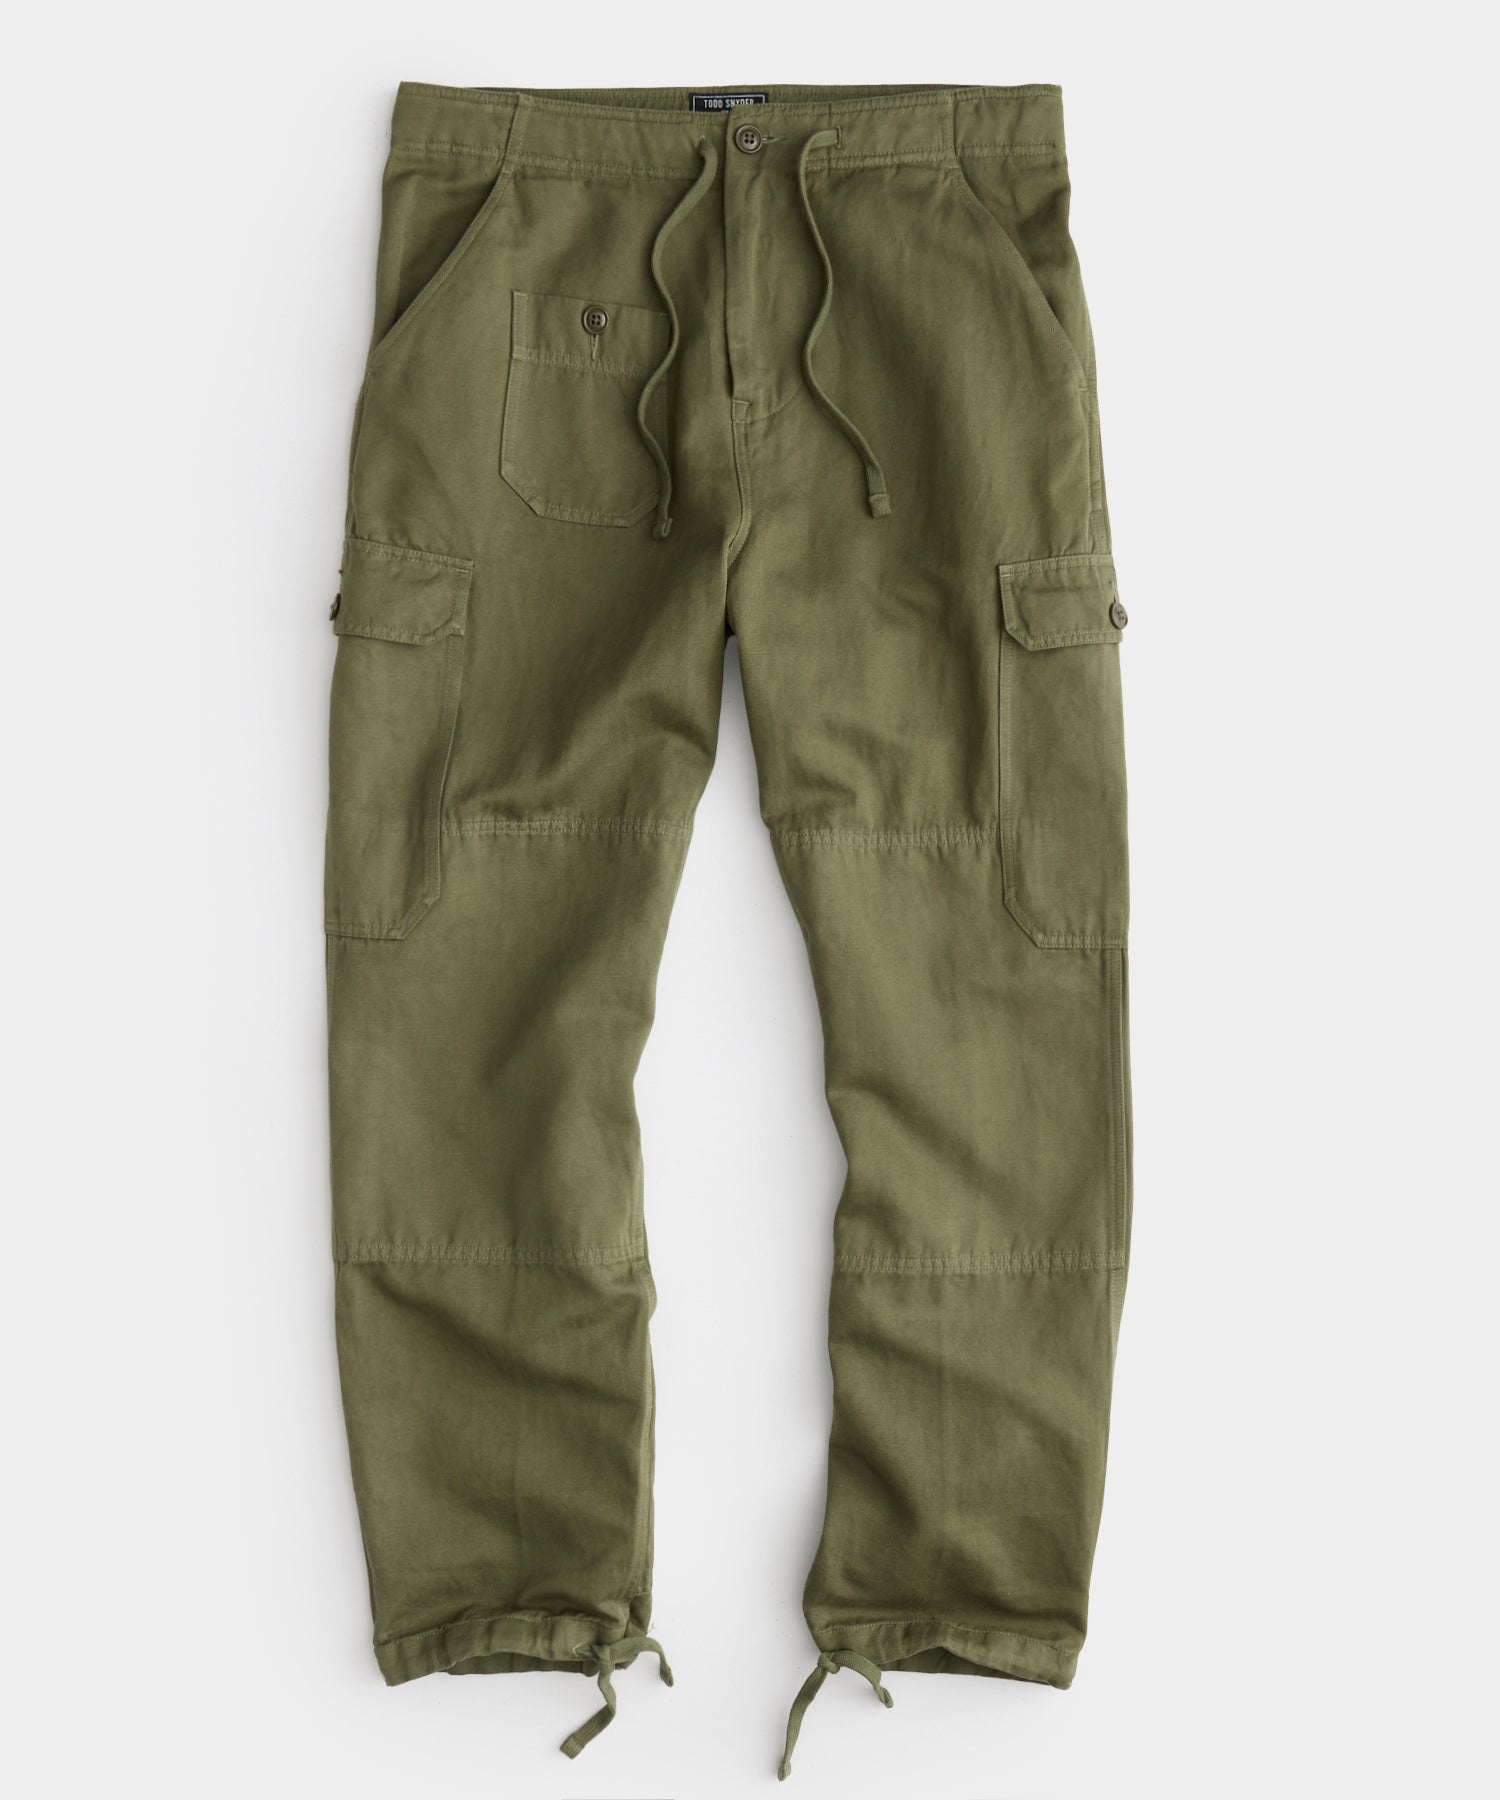 80 Cargo Pants Pocket Photos Stock Photos Pictures  RoyaltyFree Images   iStock